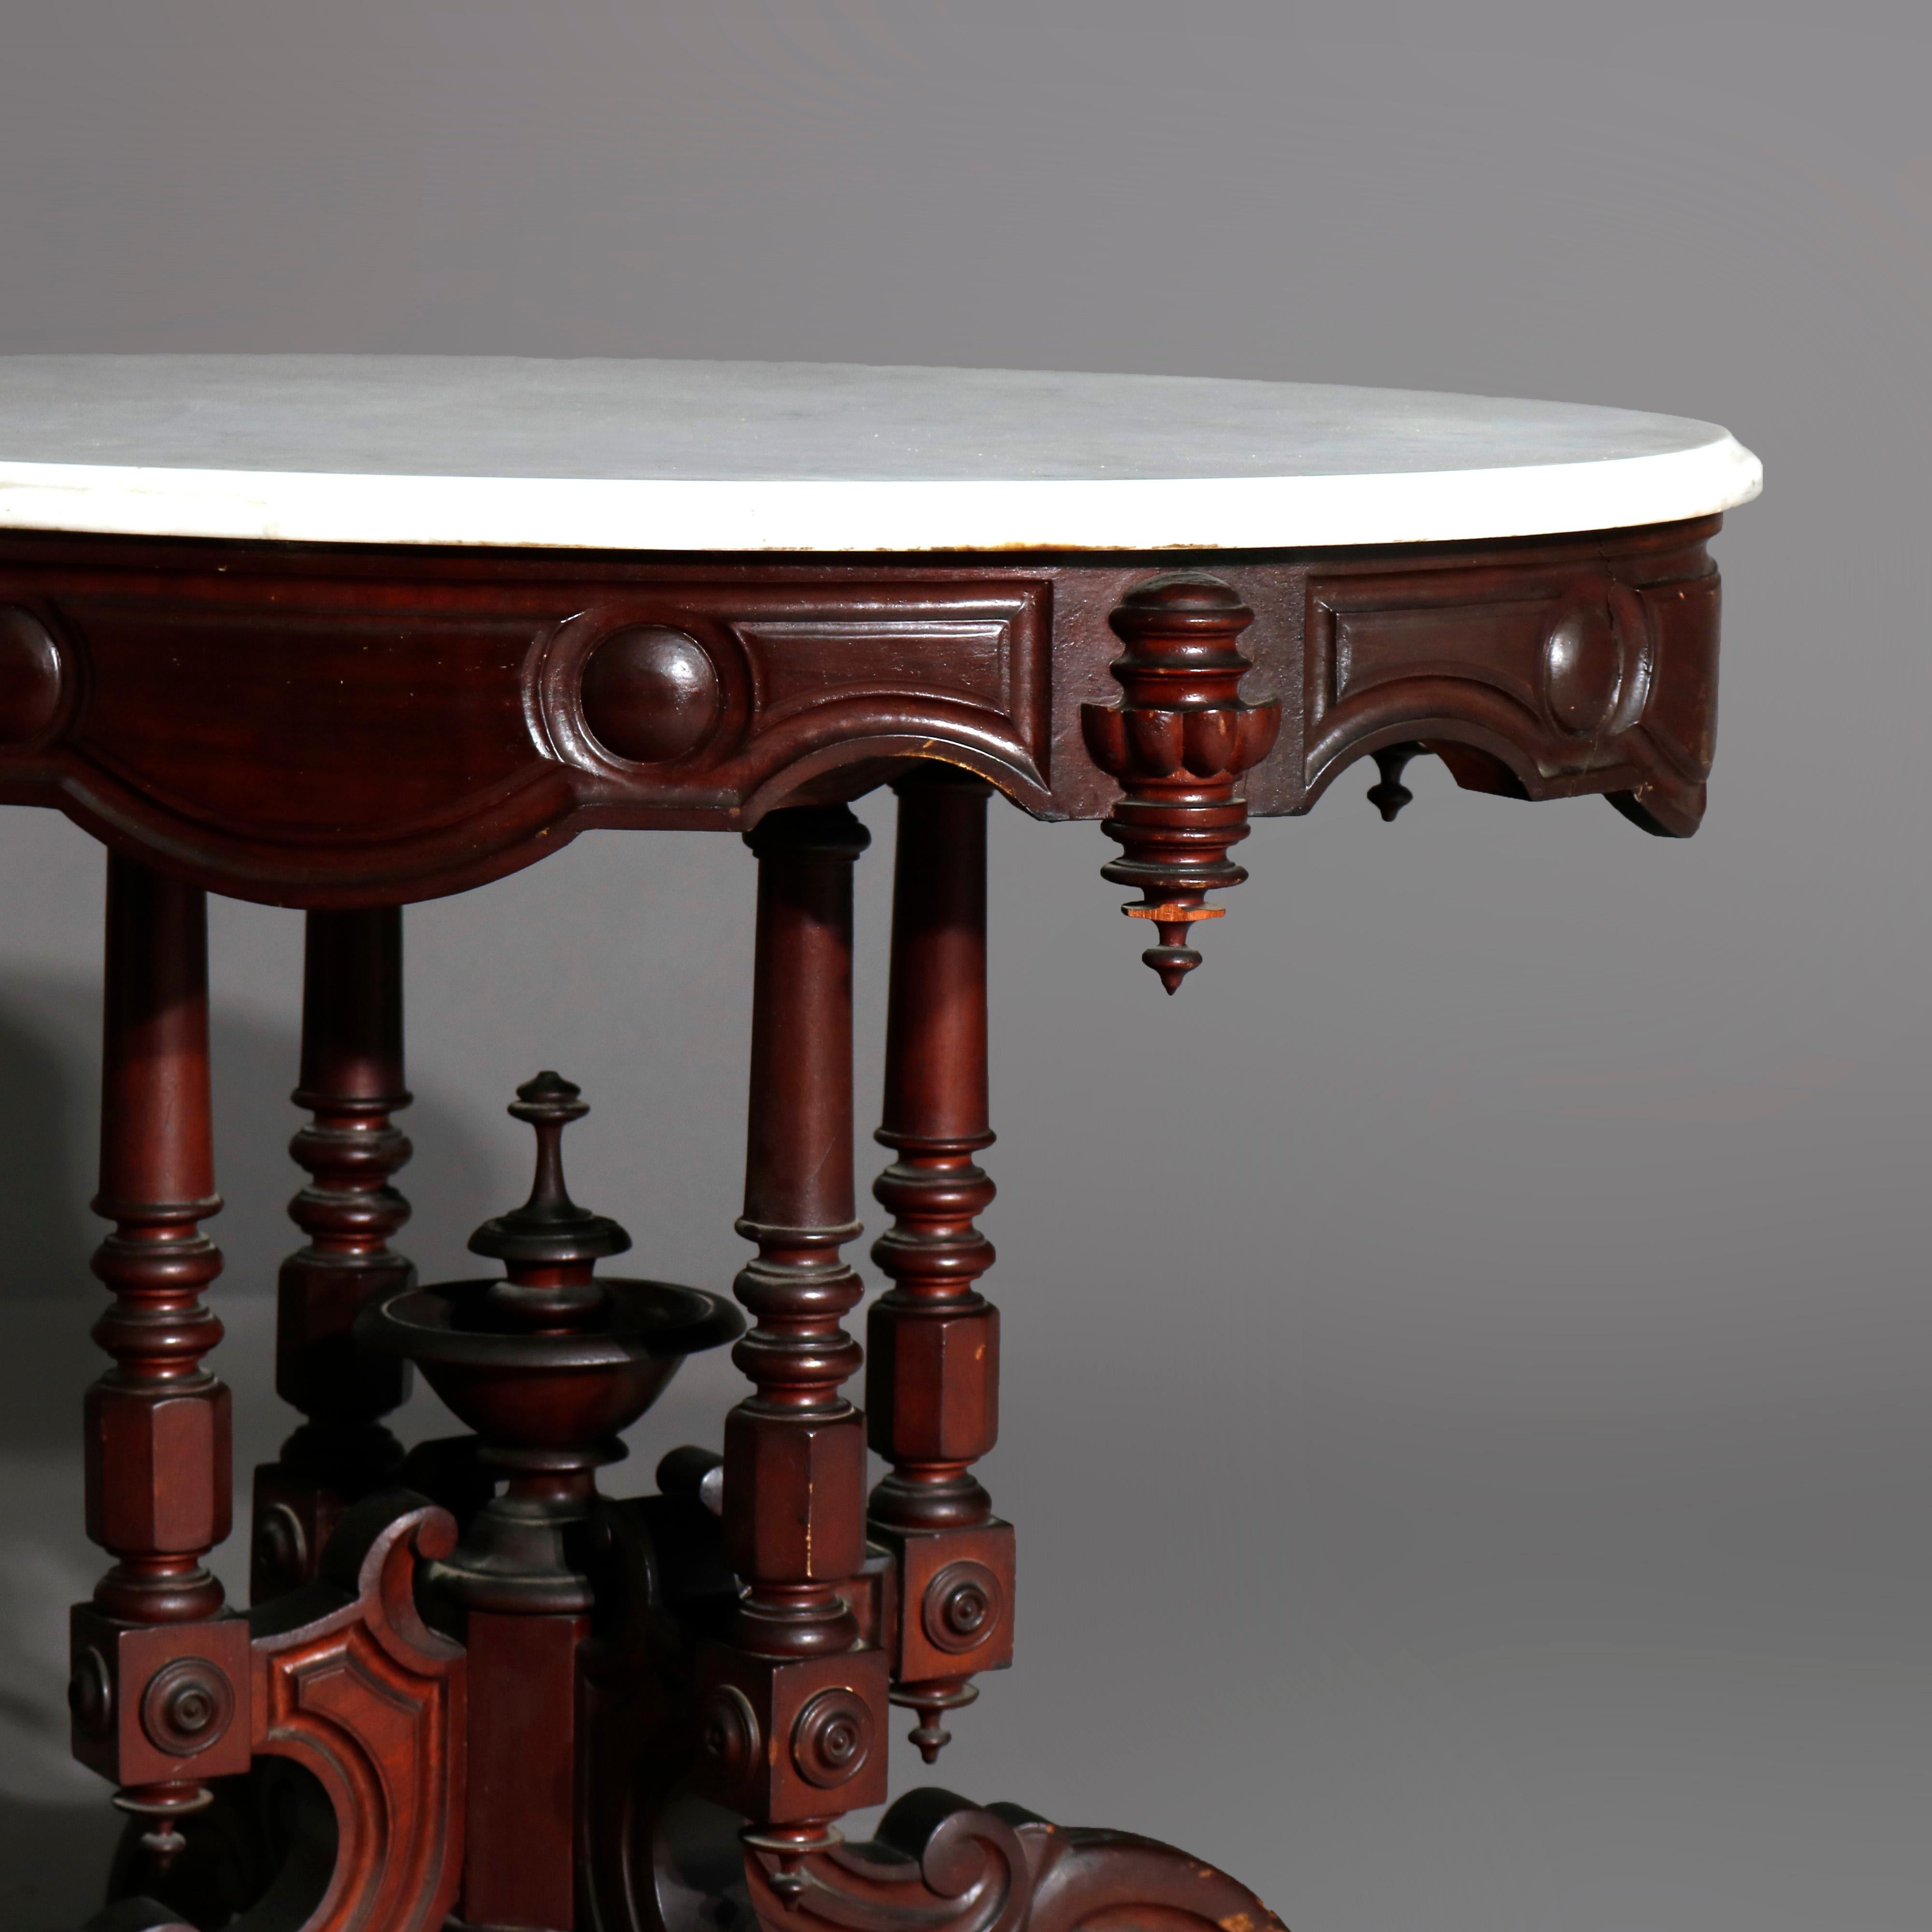 An antique Victorian parlor table offers an oval and beveled marble top surmounting a walnut base having shaped skirt and drop finials over four turned columns and carved urn form center finial, raised on carved scroll form legs with casters, circa